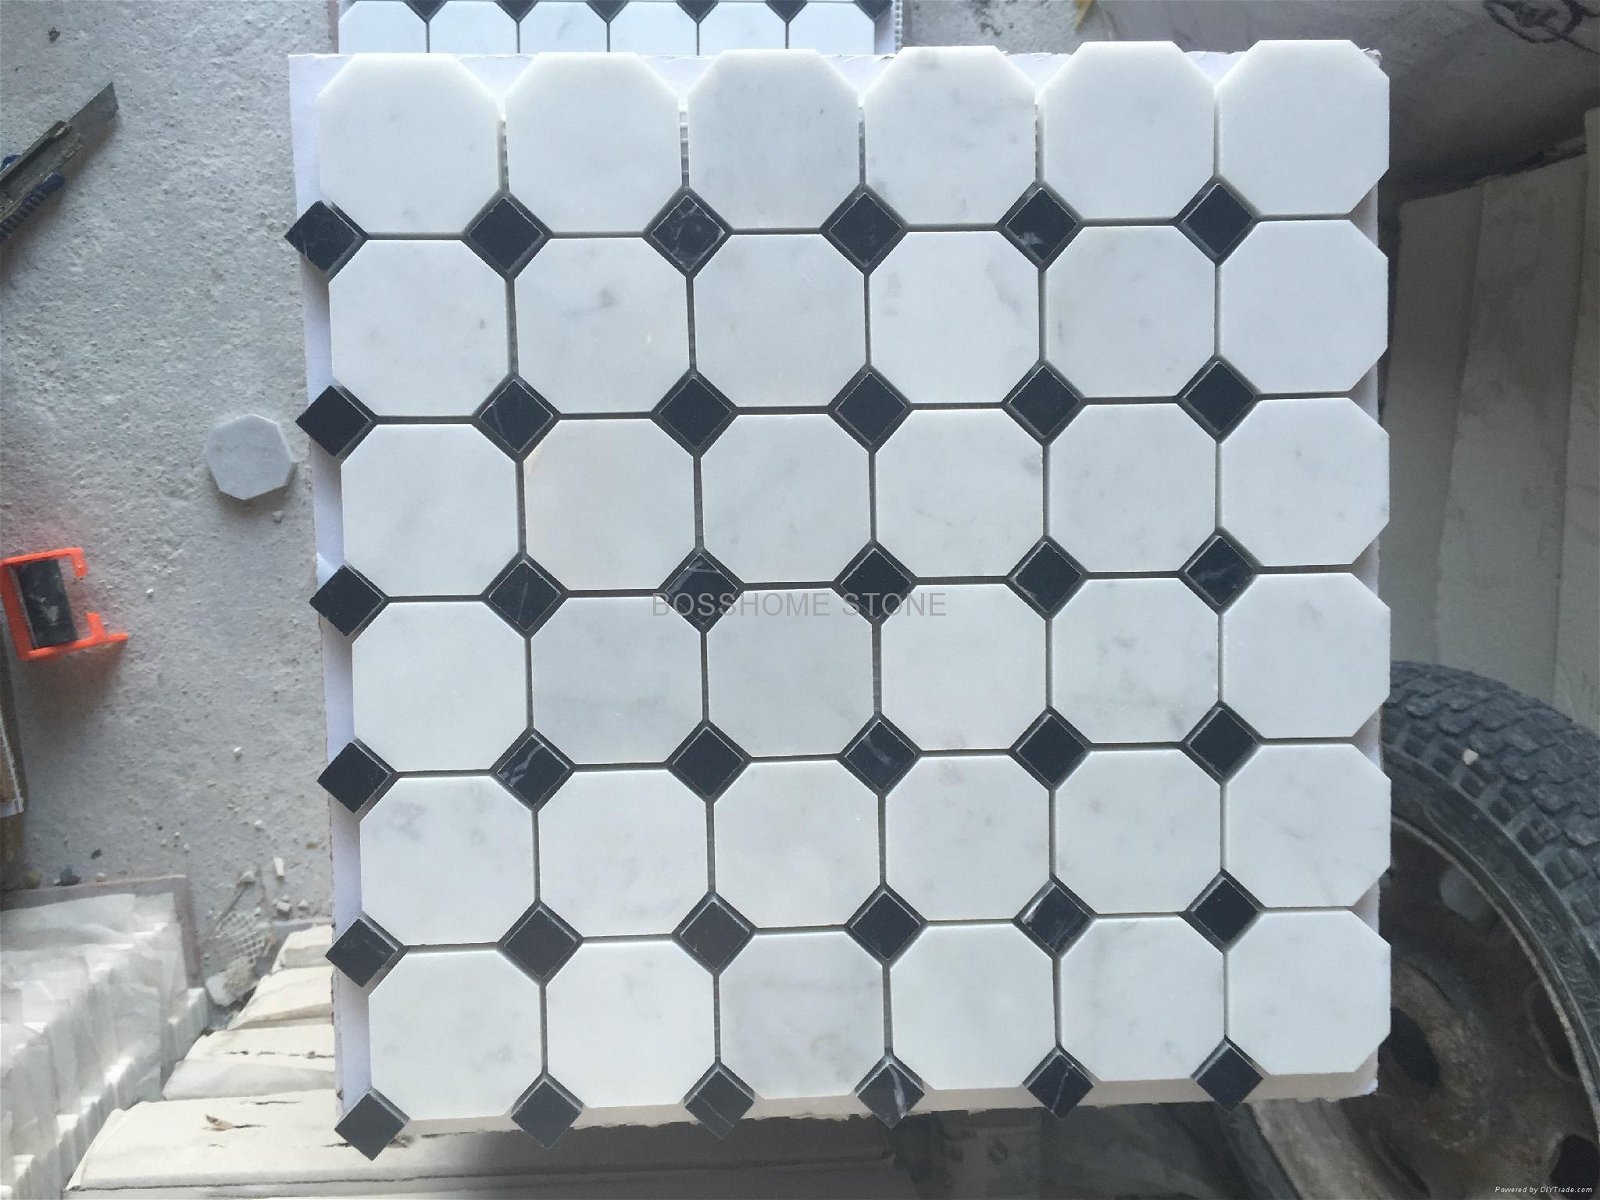 Black and white marble mosaic floor tiles